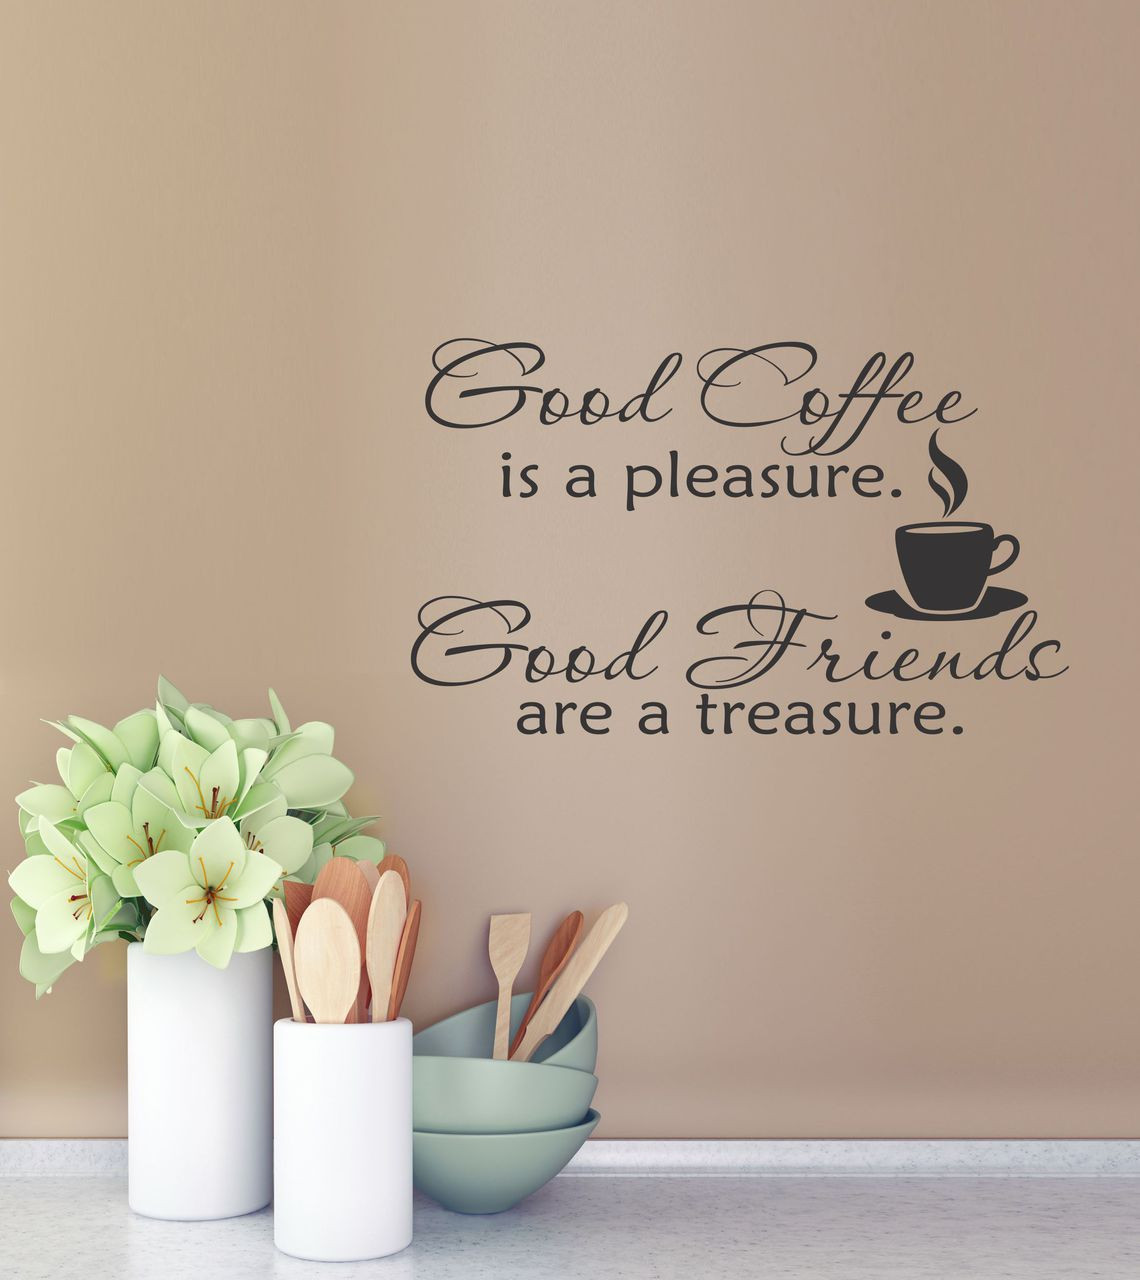 https://cdn11.bigcommerce.com/s-571px4/images/stencil/1280x1280/products/1179/5042/WD060_Good_Coffee_Vinyl_Wall_Decal_Kitchen_Quote_Room__99462.1602266230.jpg?c=2